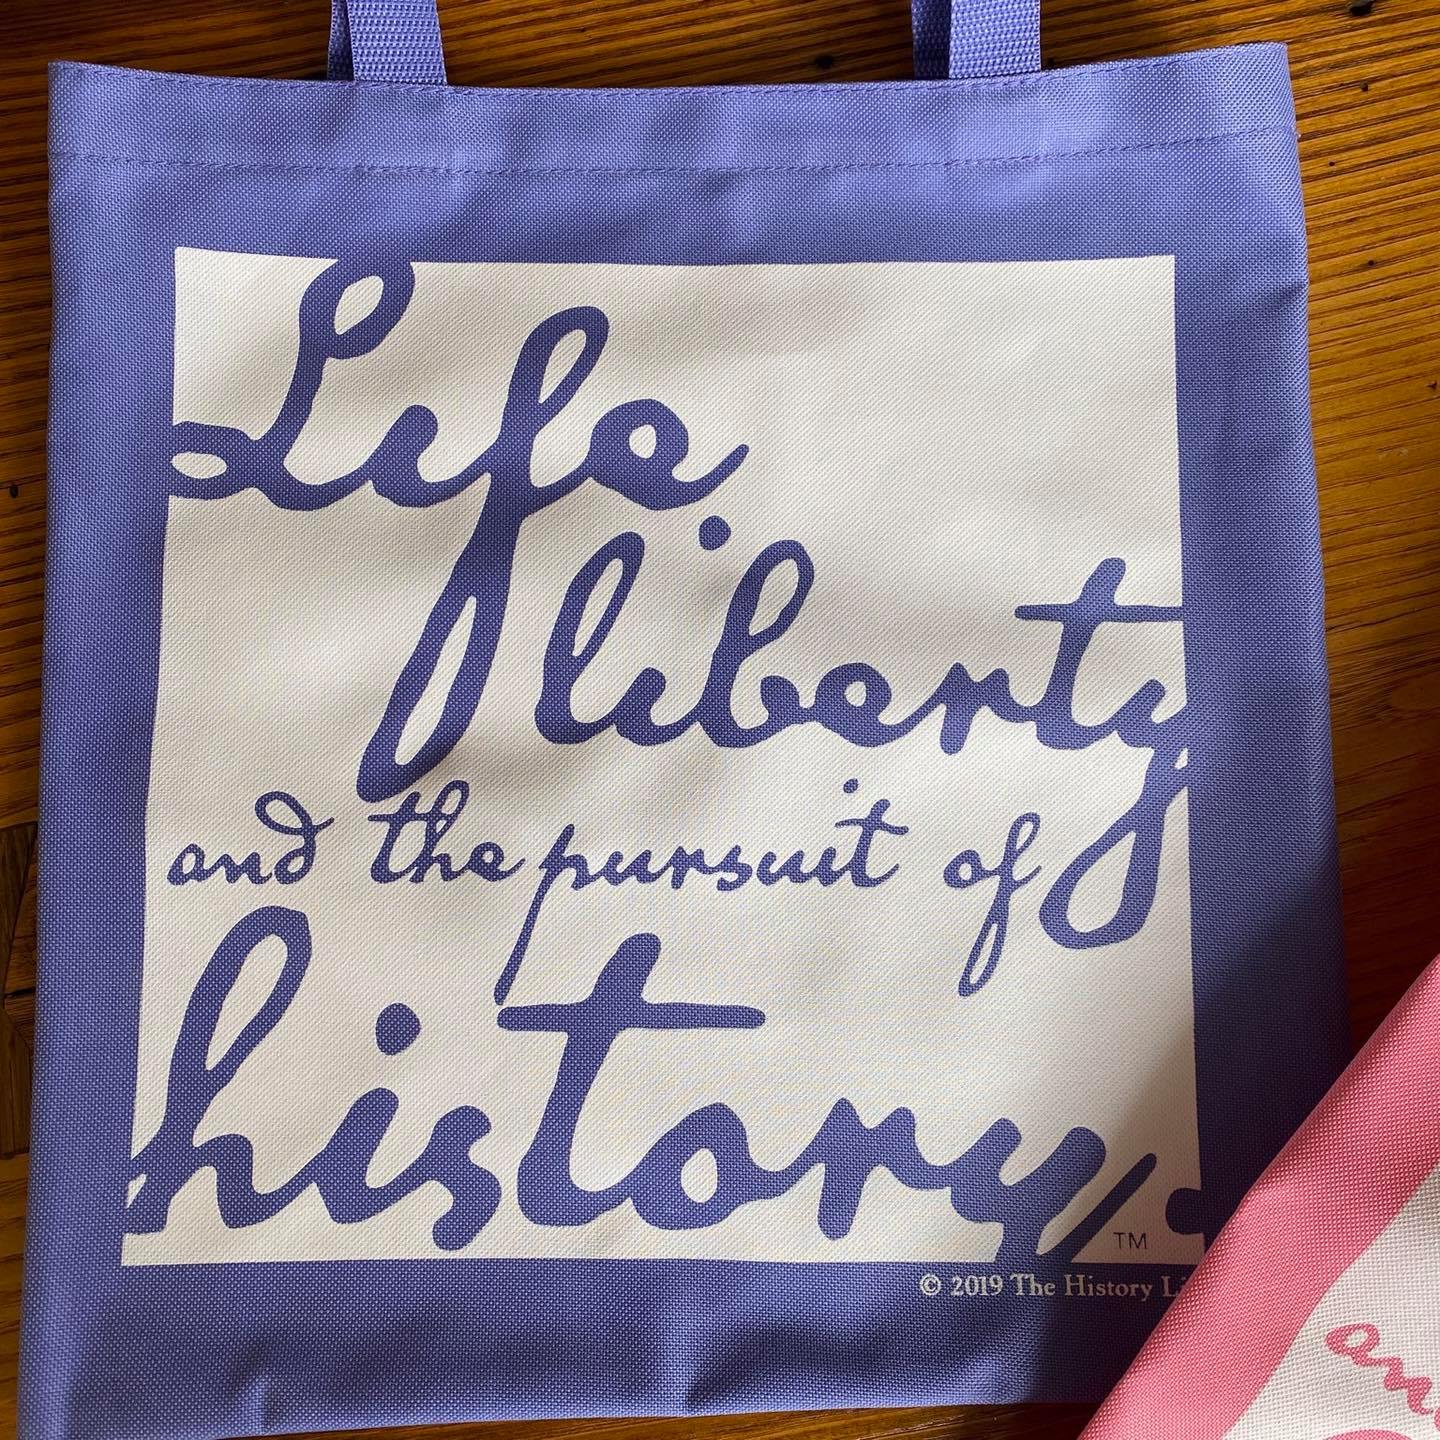 Purple "Life, liberty, and the pursuit of history" Tote bag - from the history list store